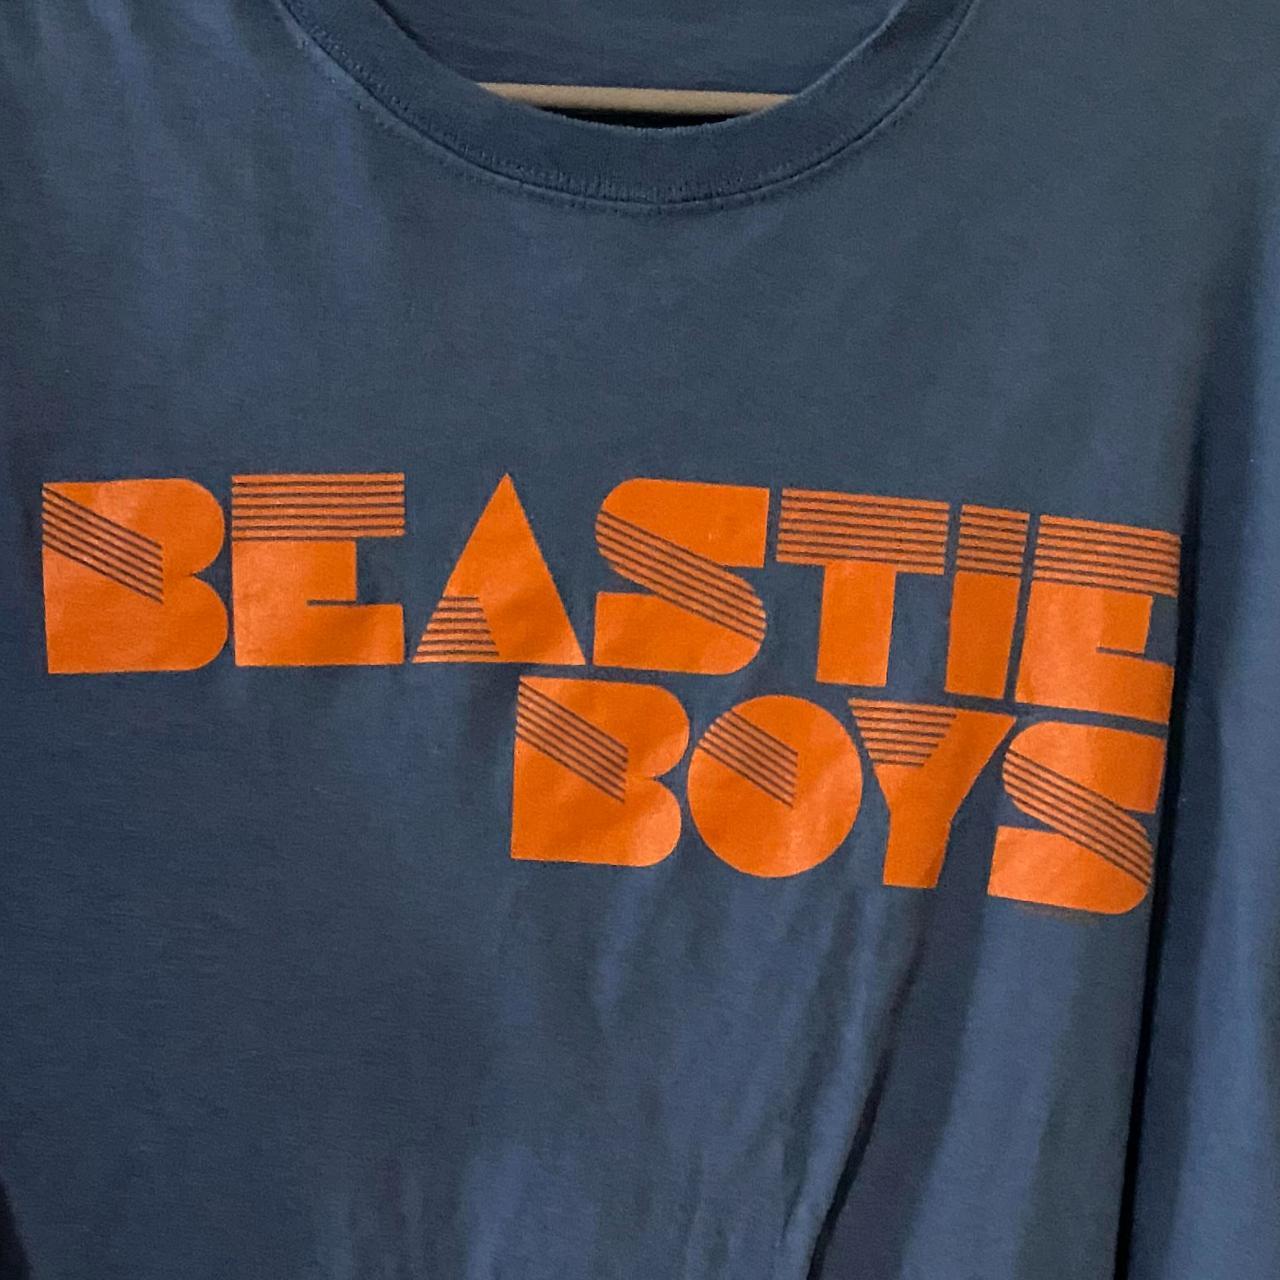 Product Image 3 - Beastie Boys Graphic T-Shirt
Mens Size